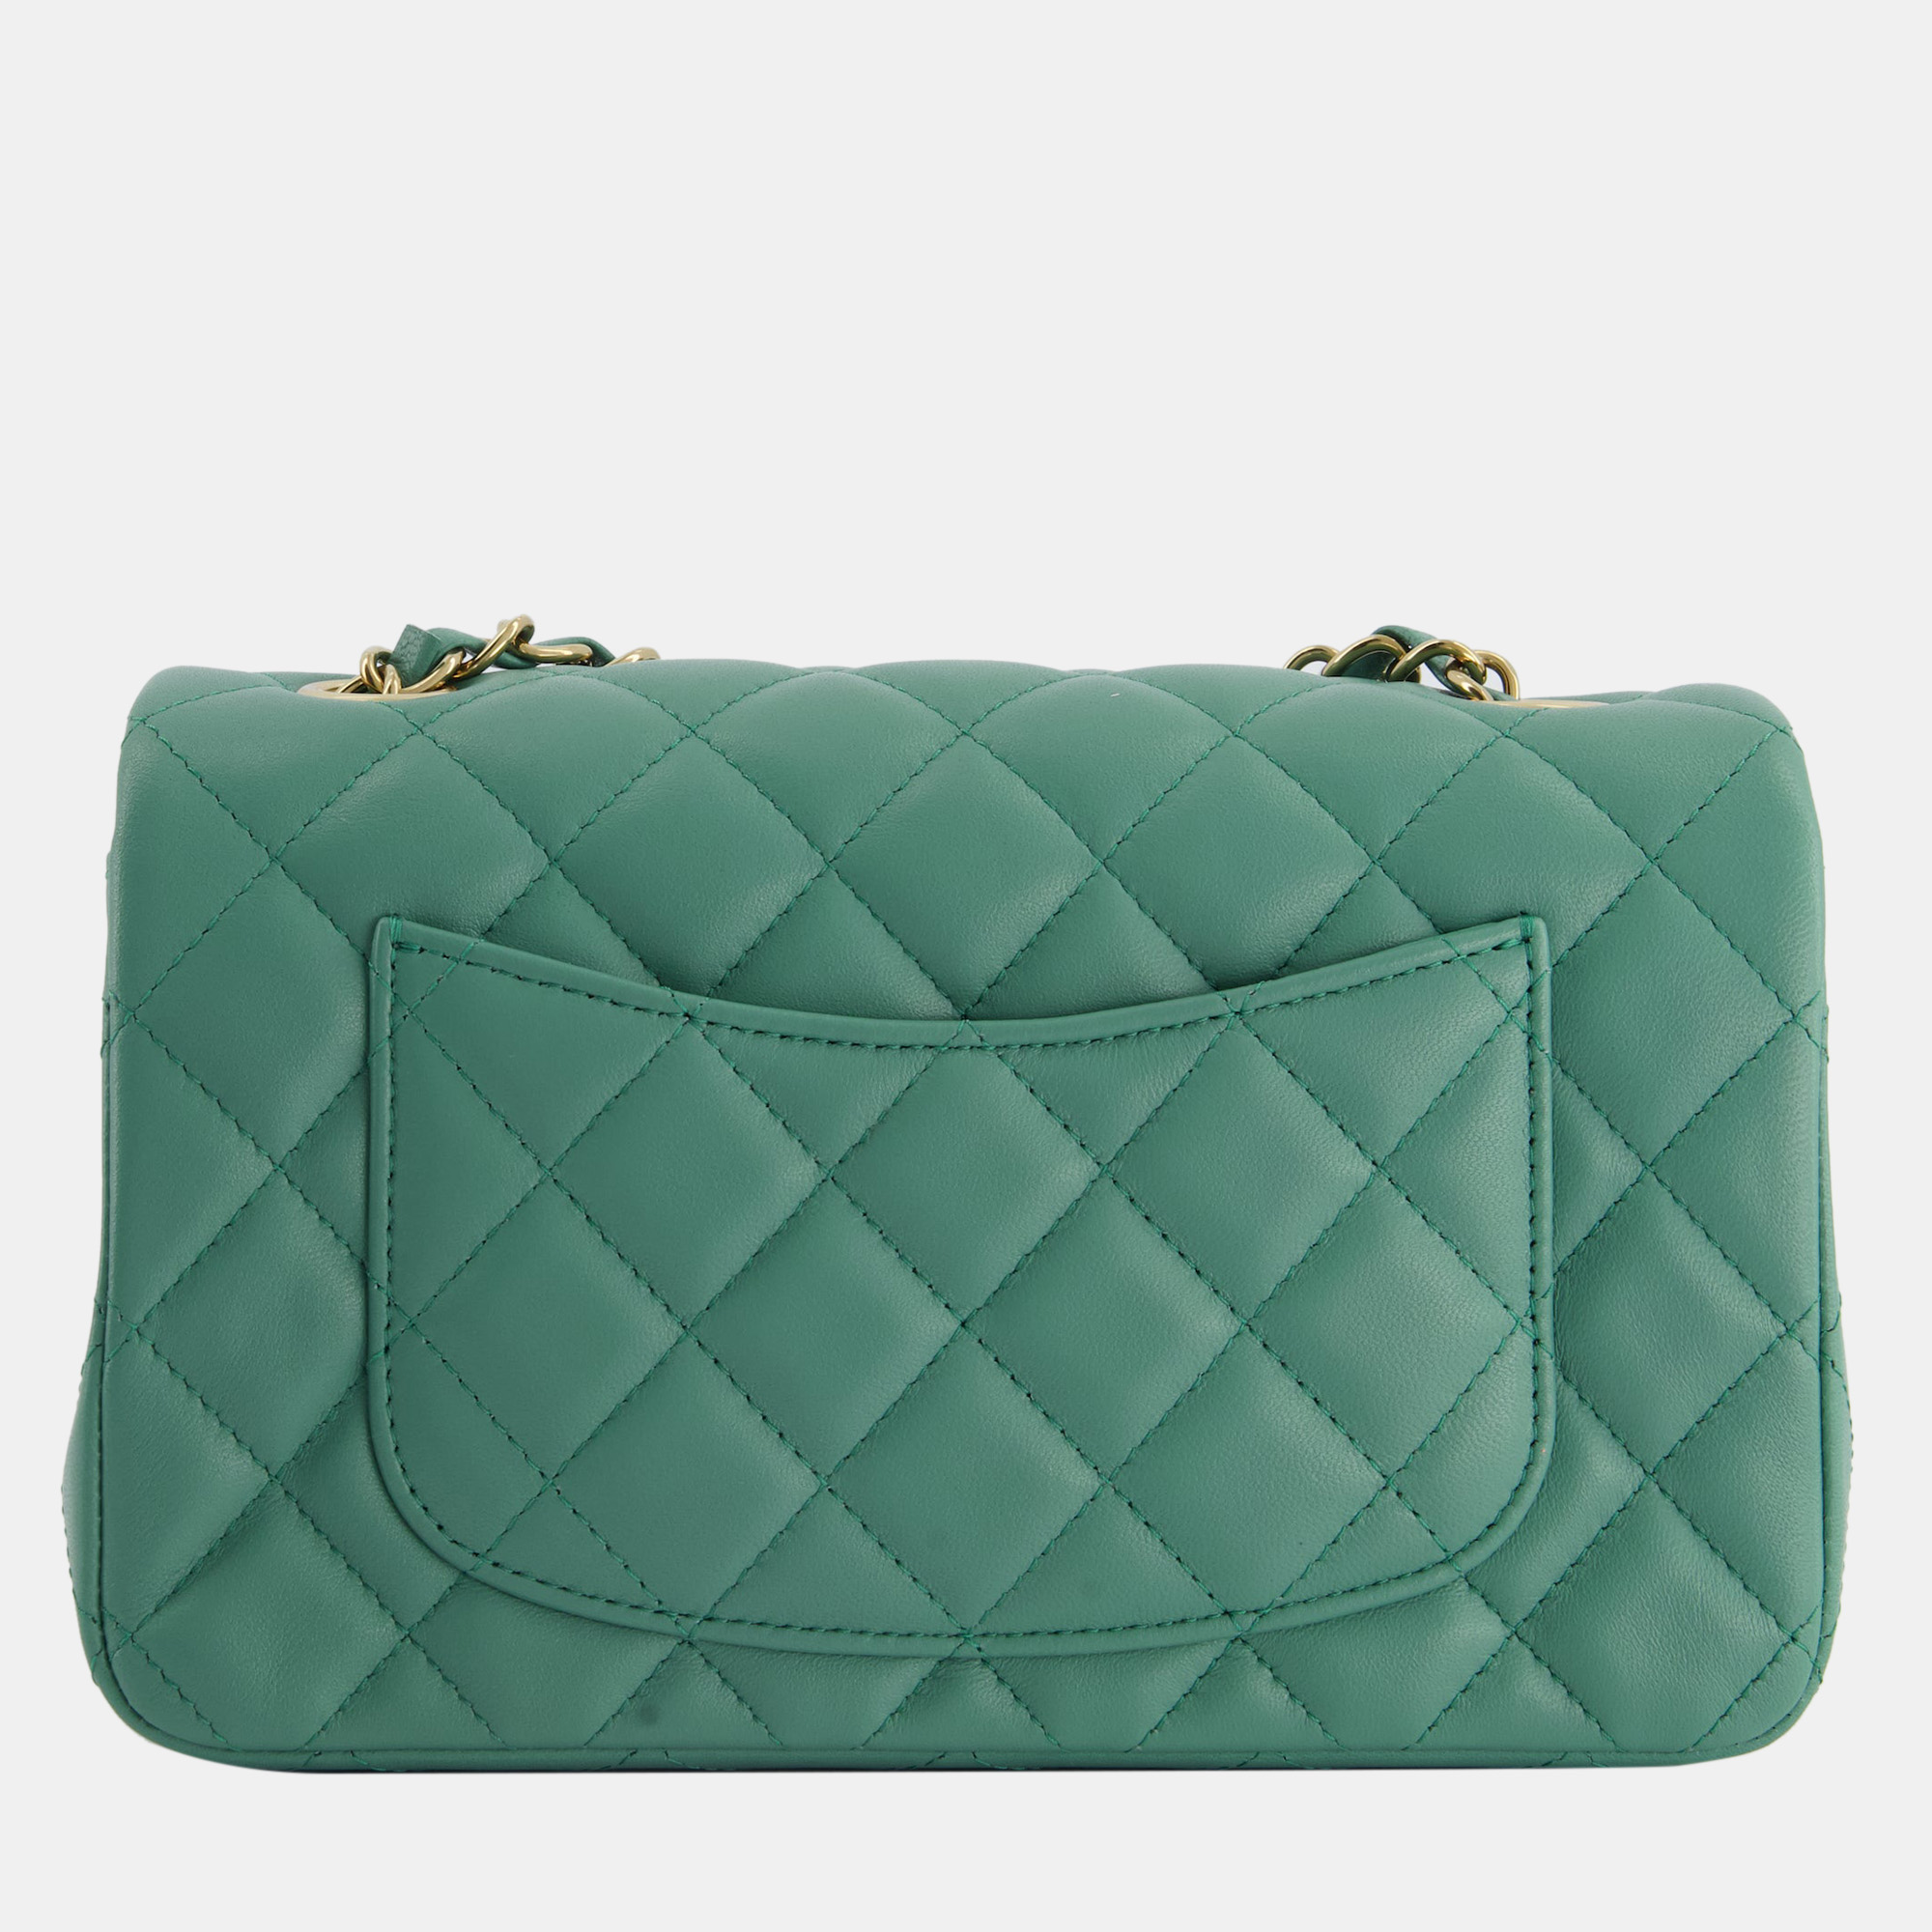 Chanel Green Mini Rectangular Bag In Lambskin Leather With  Champagne Gold Hardware